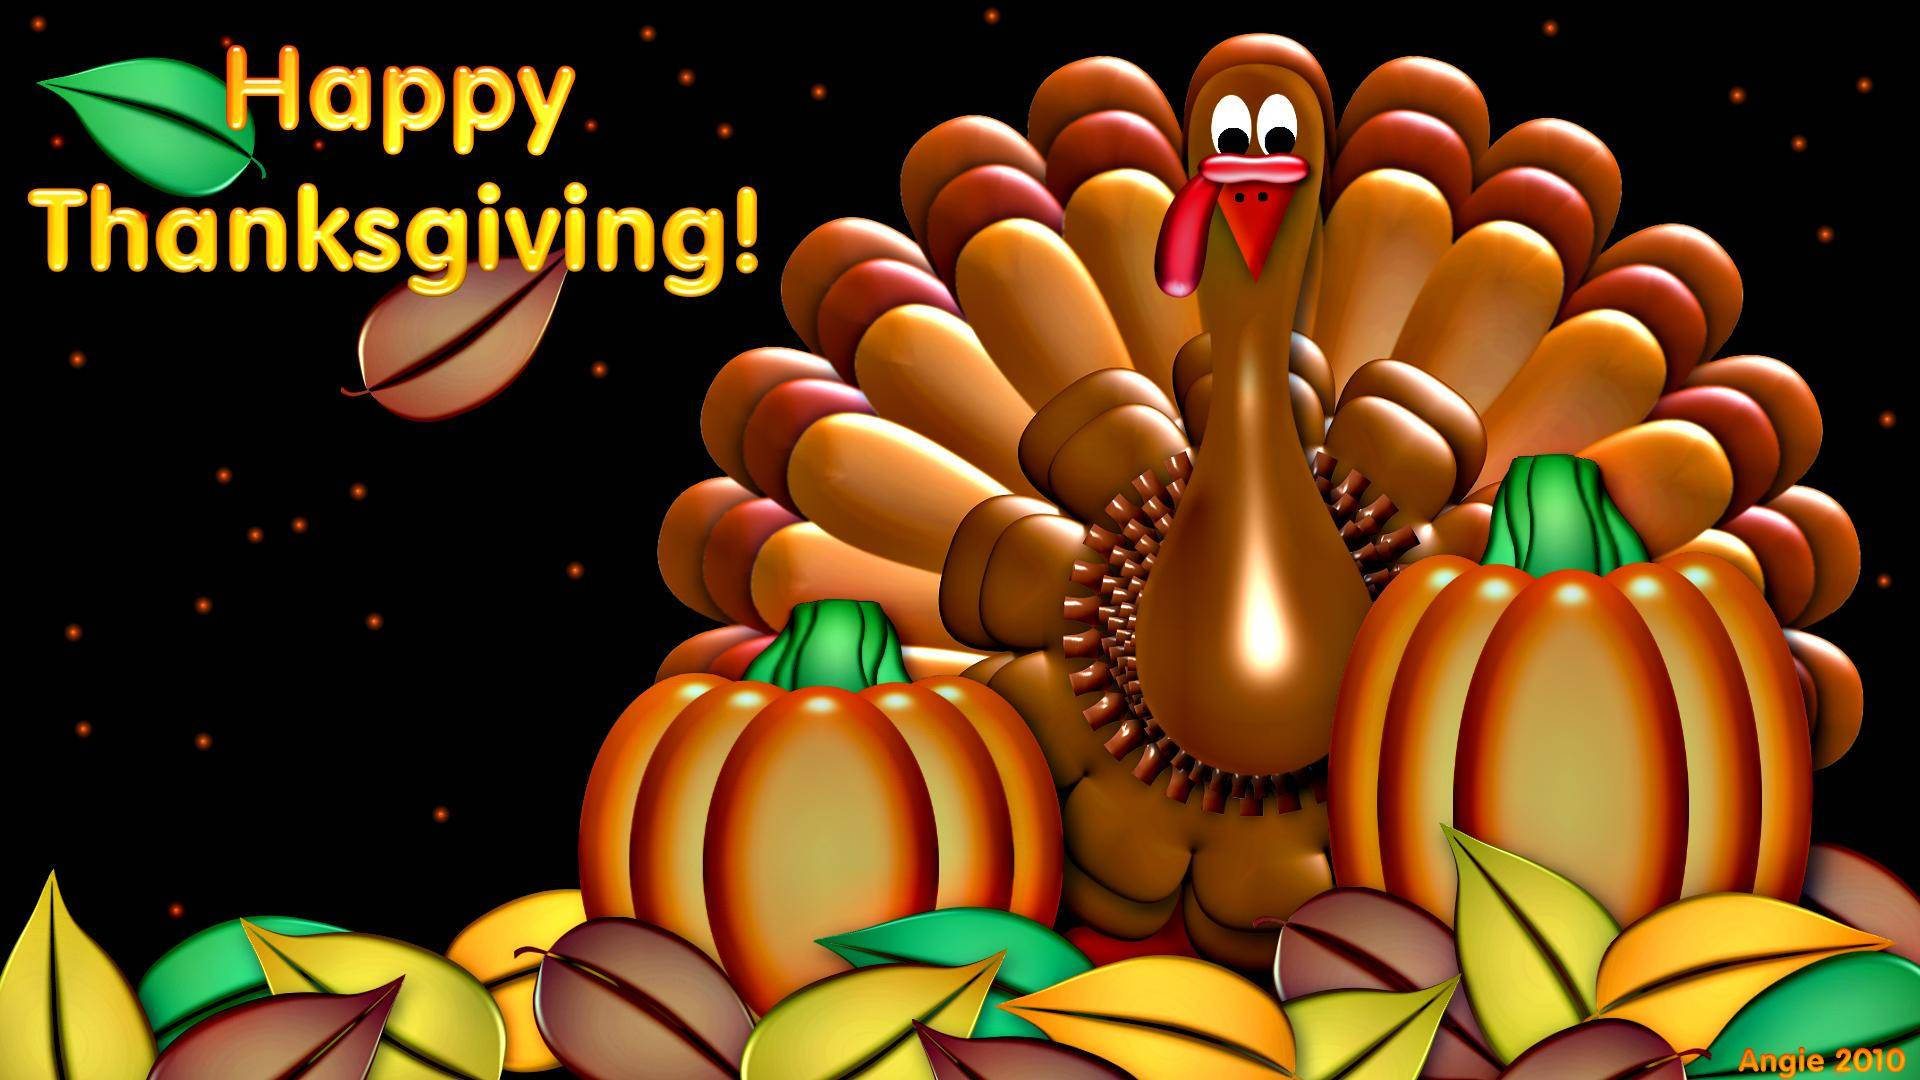 2538 Thanksgiving Wallpaper Stock Photos HighRes Pictures and Images   Getty Images